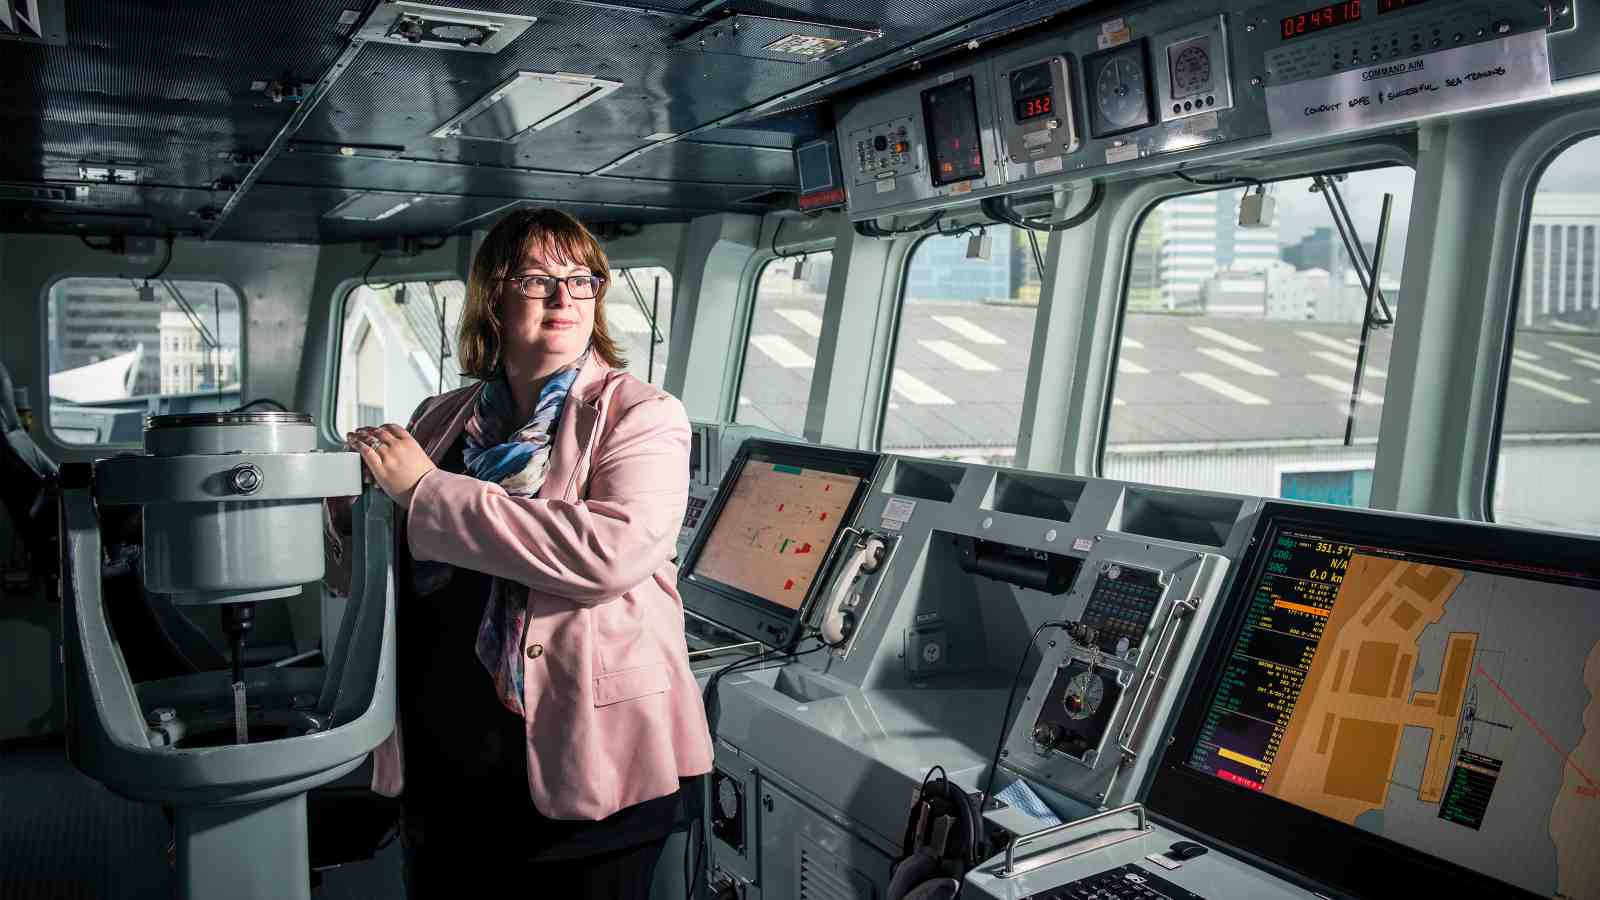 Senior Lecturer Joanna Mossop inside the control deck of a navy ship.